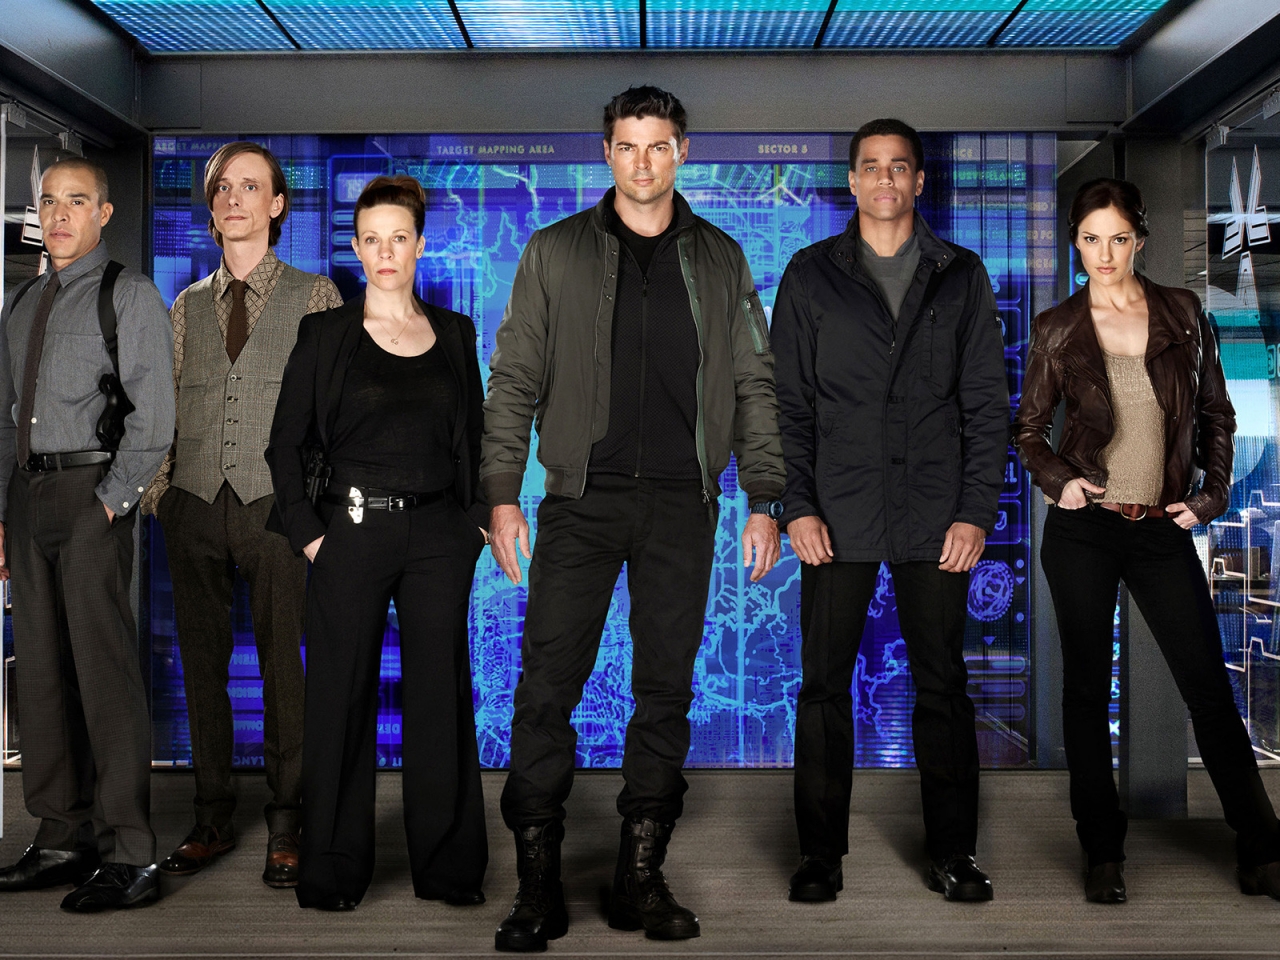 Almost Human Cast for 1280 x 960 resolution